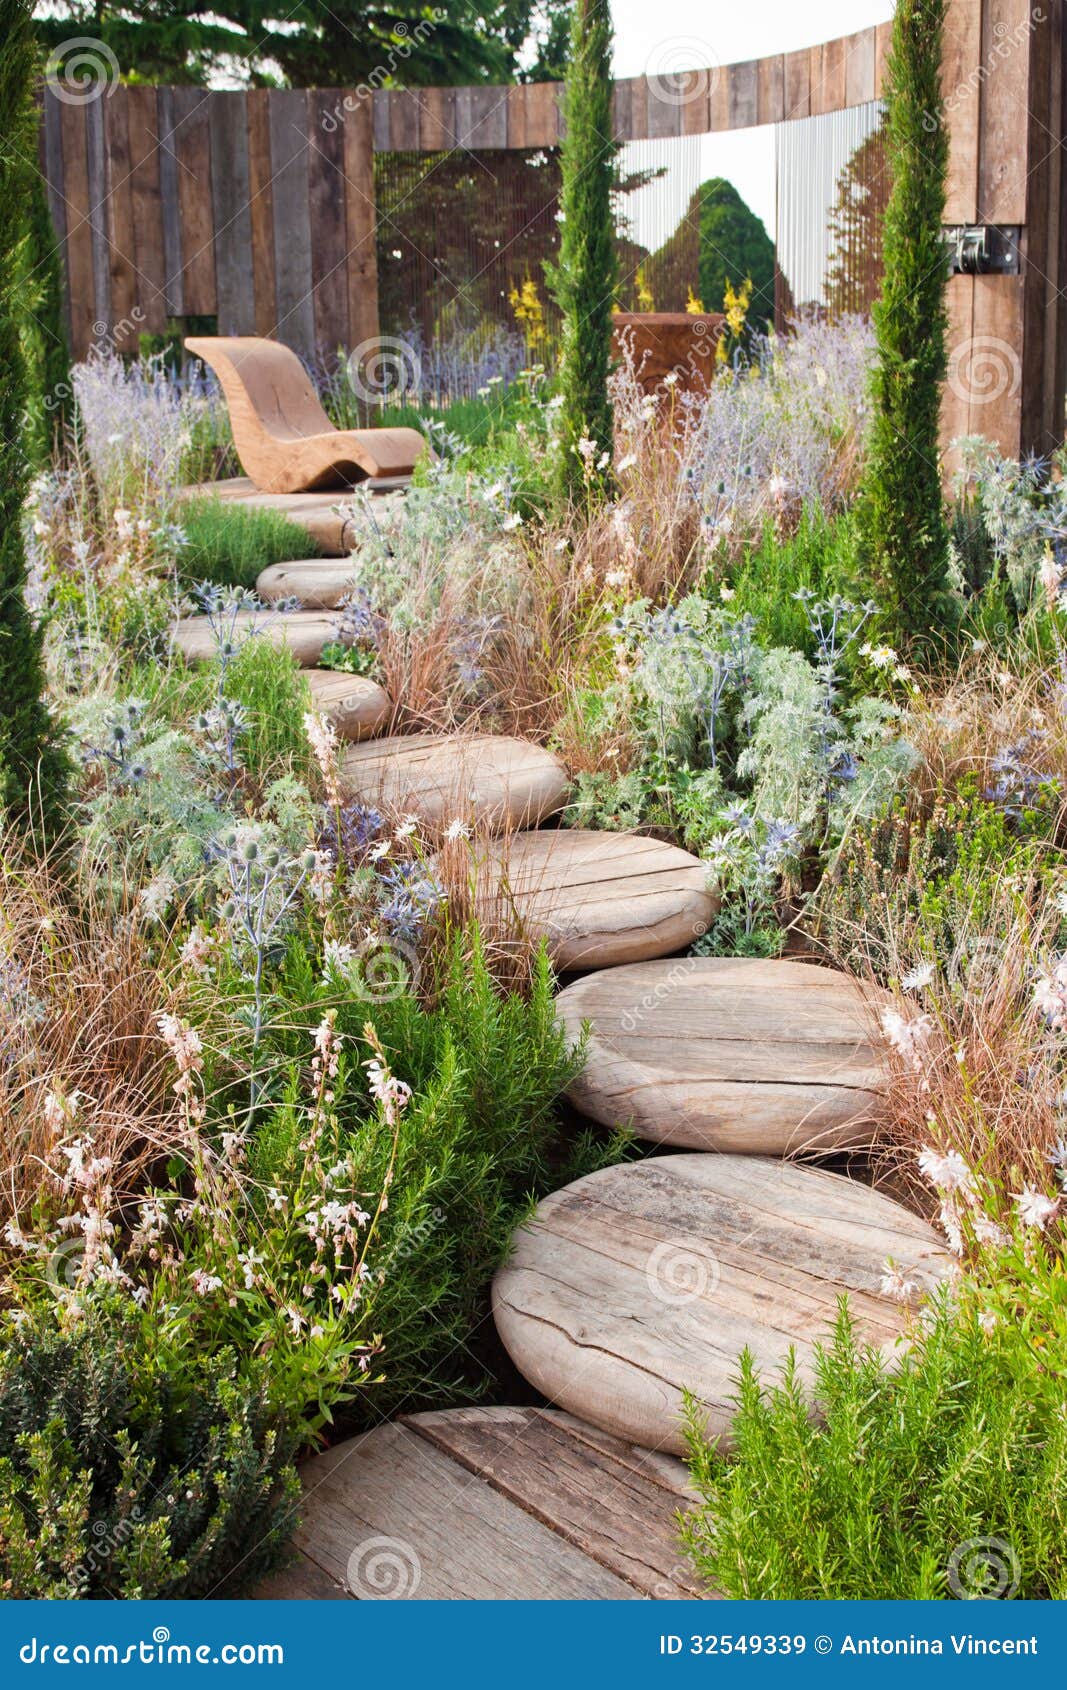 Tranquil garden with wooden steps and seats